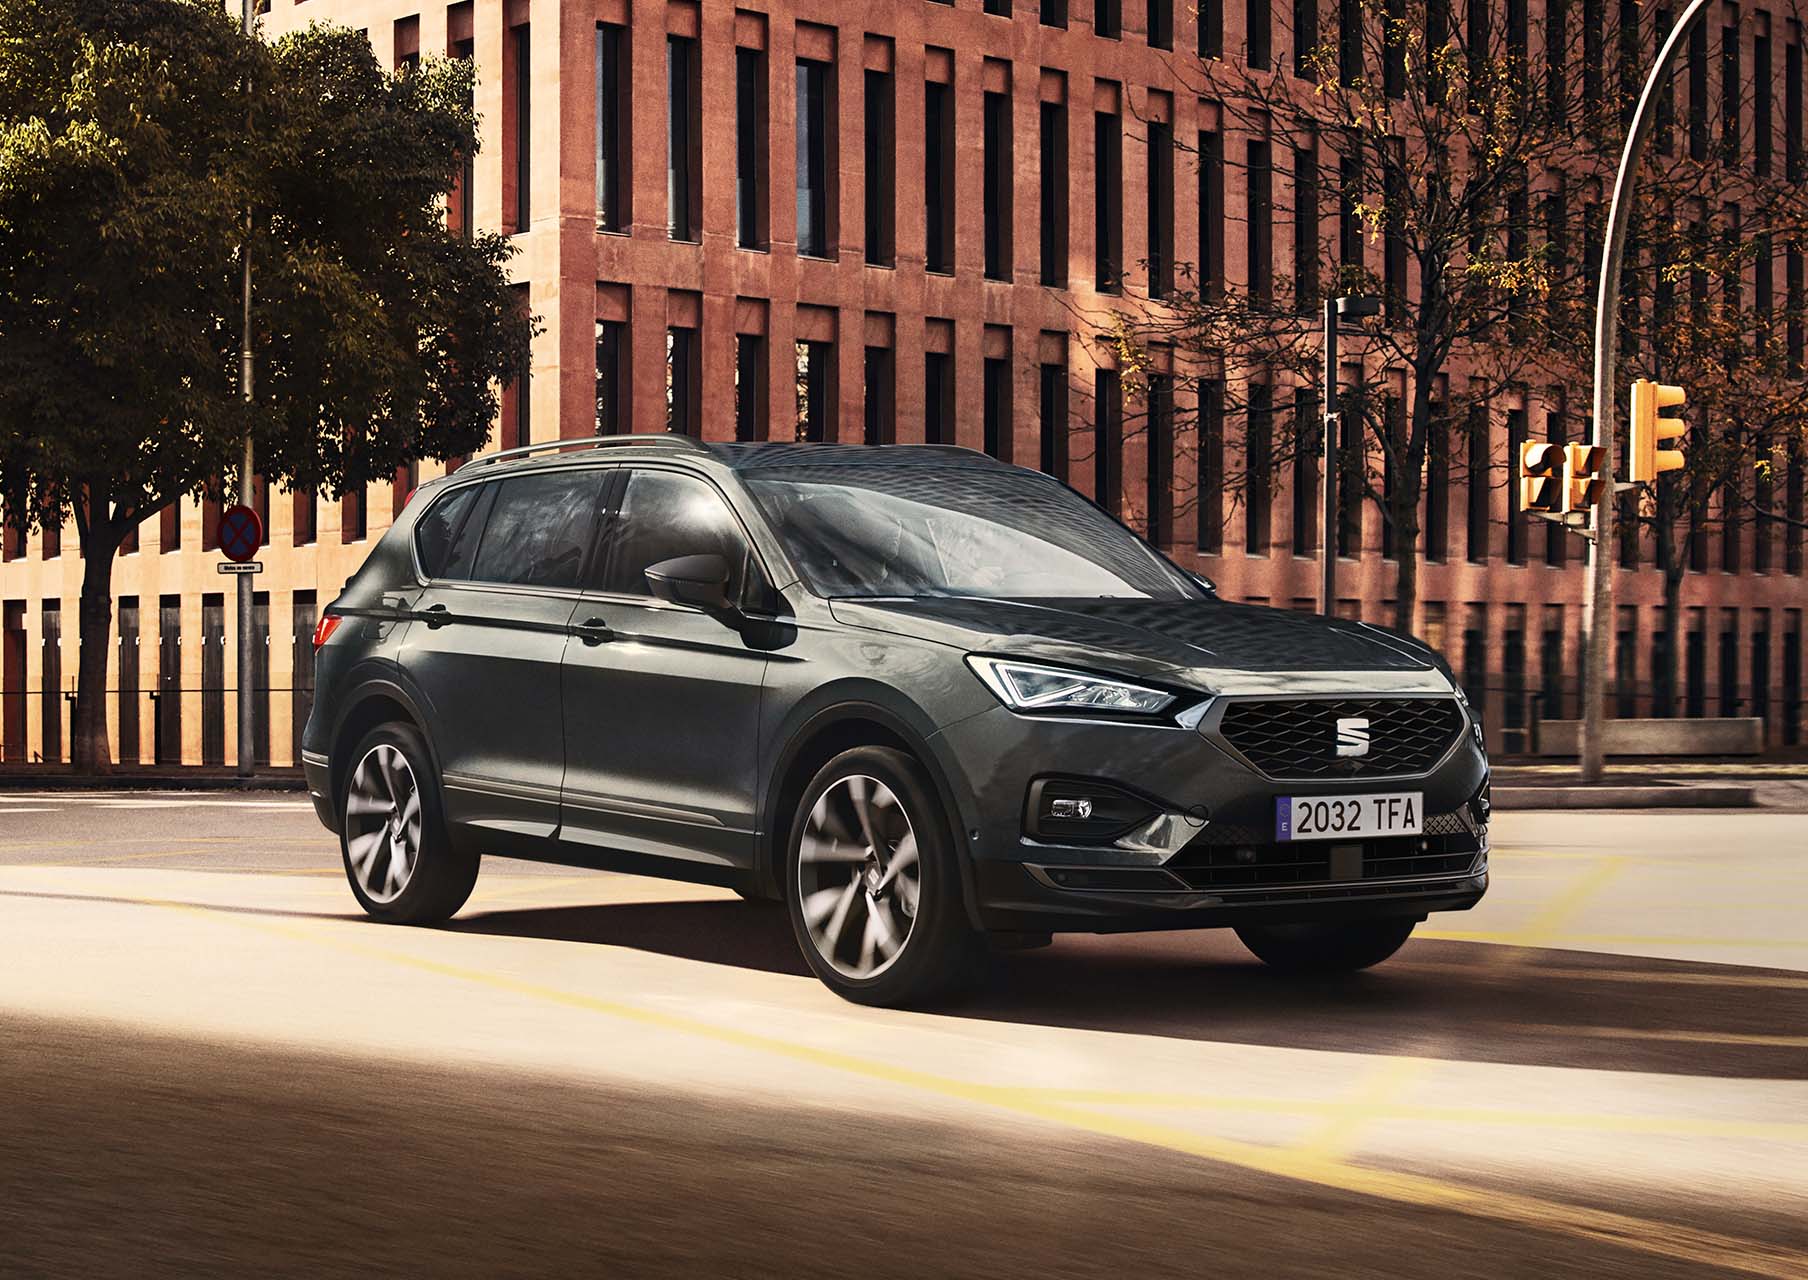 Grey SEAT Tarraco with alloy wheels driving